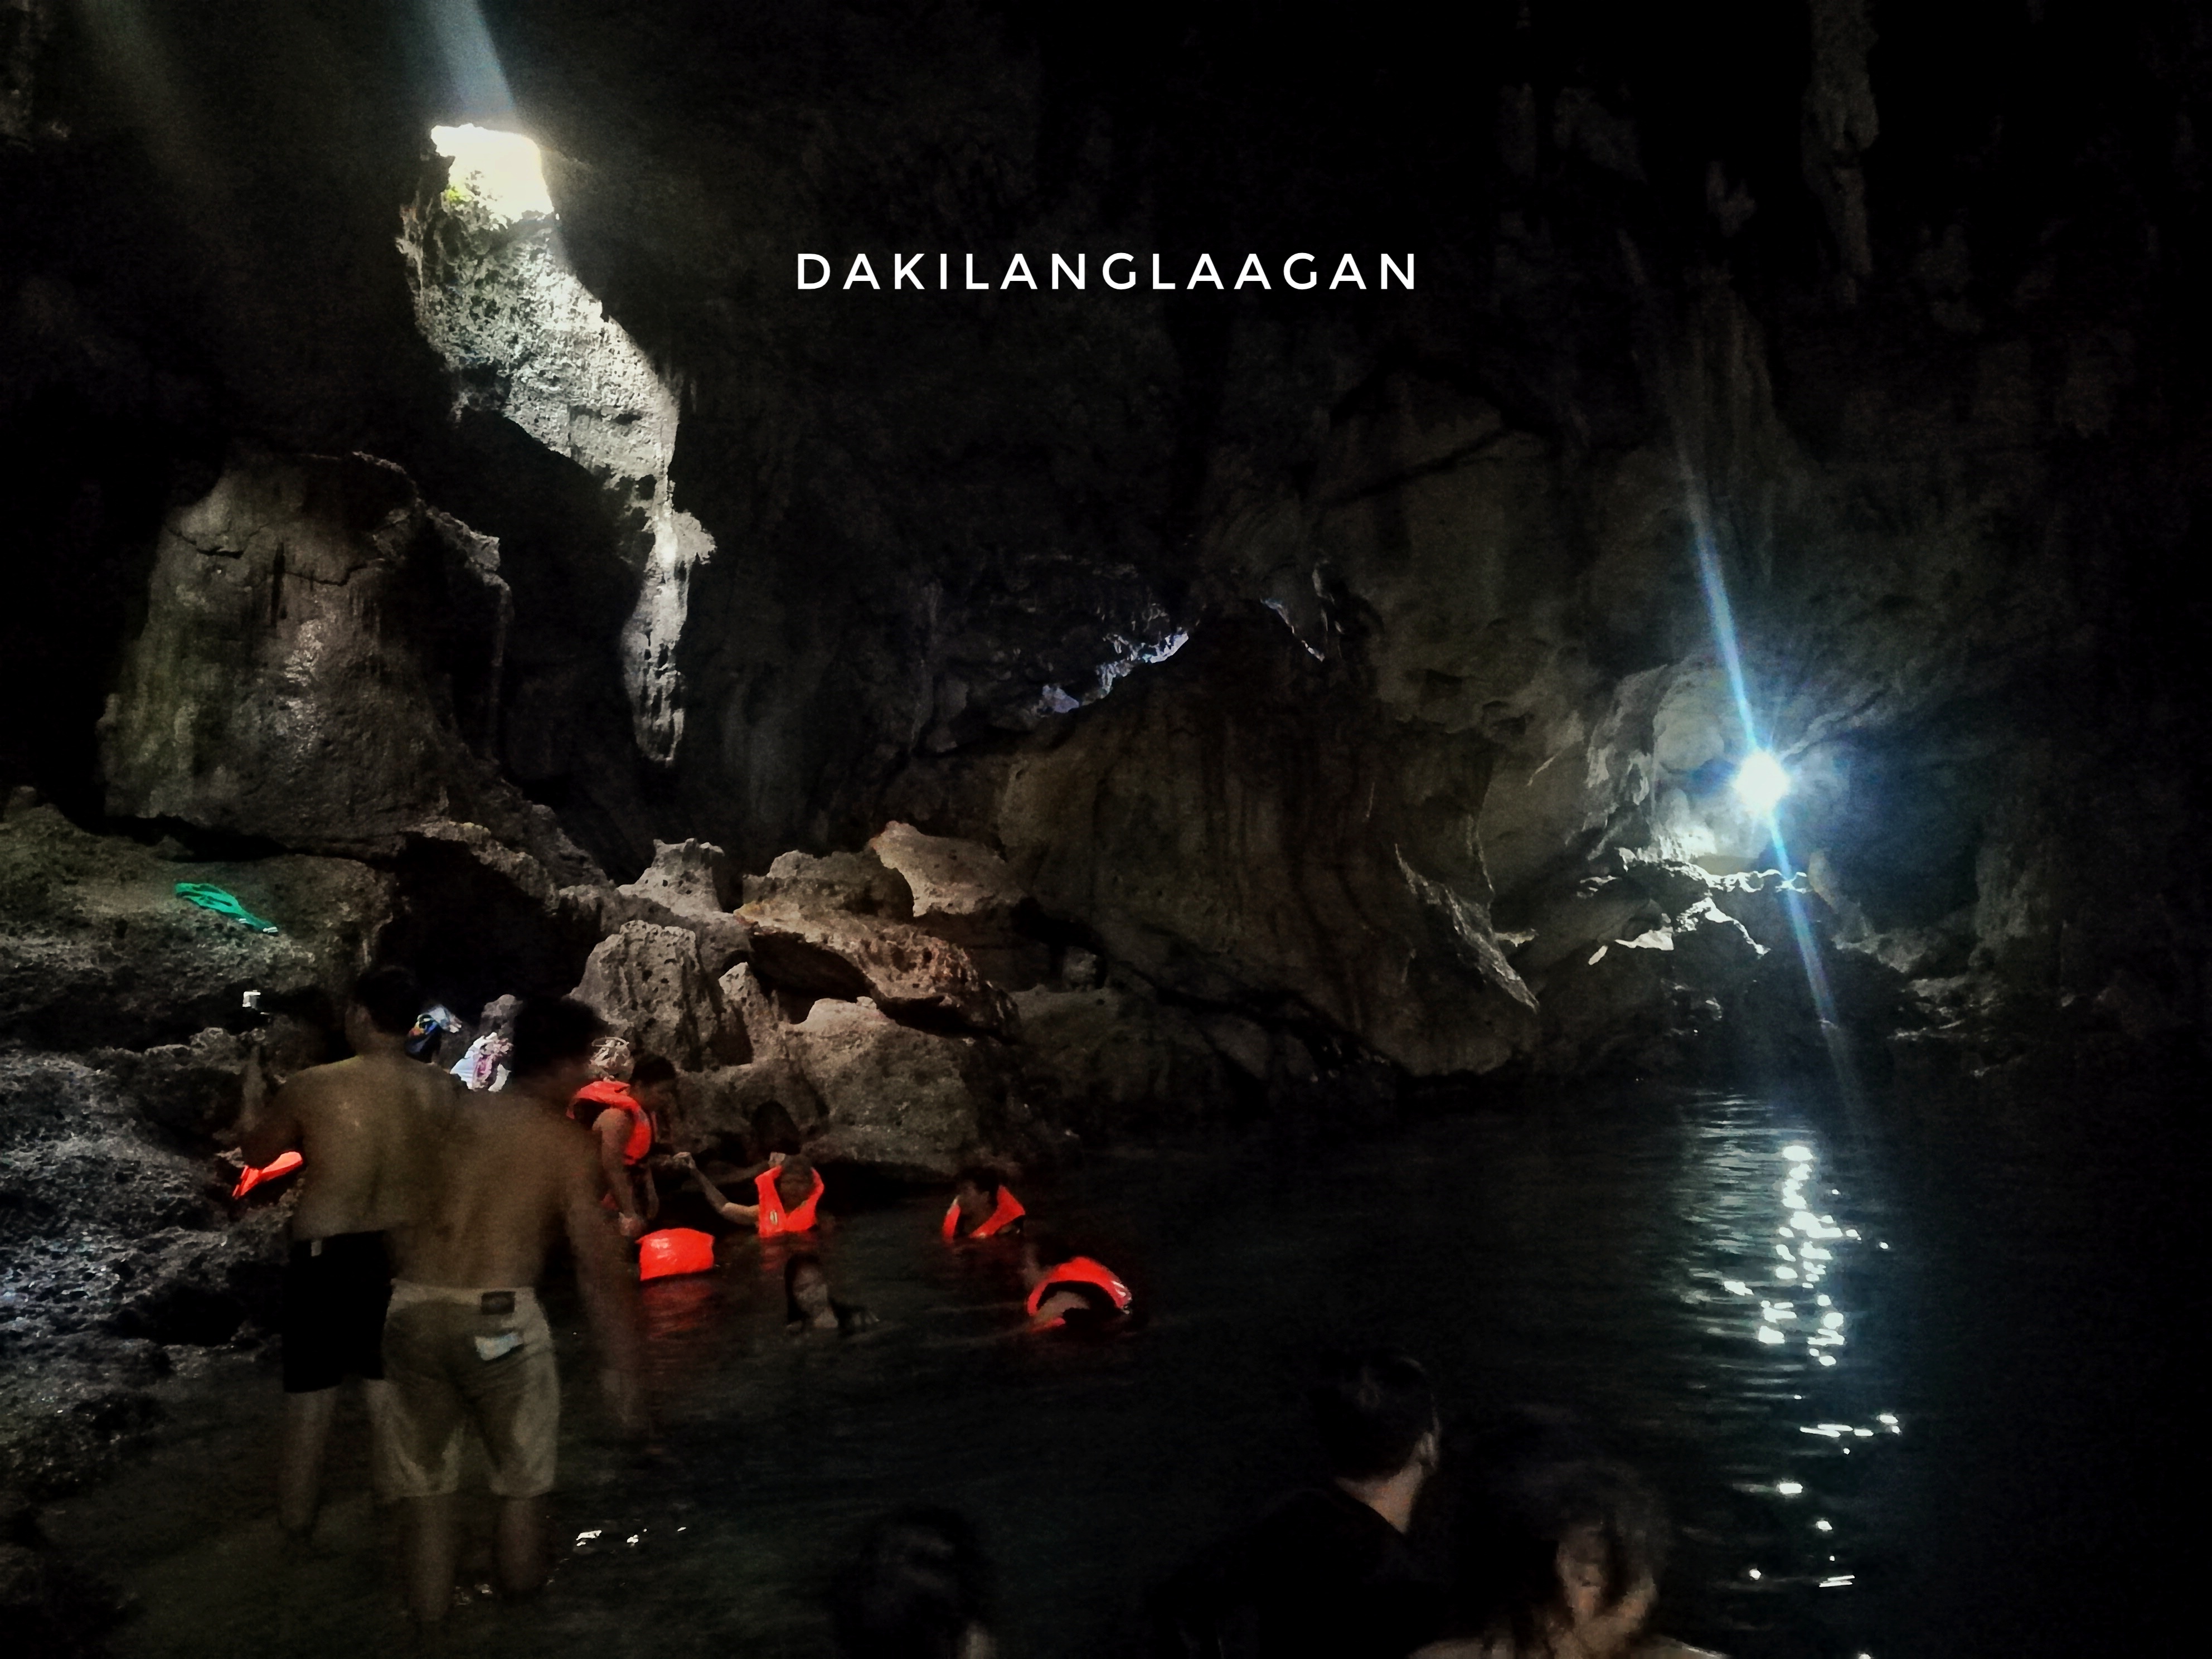 Hinagdanan Cave - How to get there